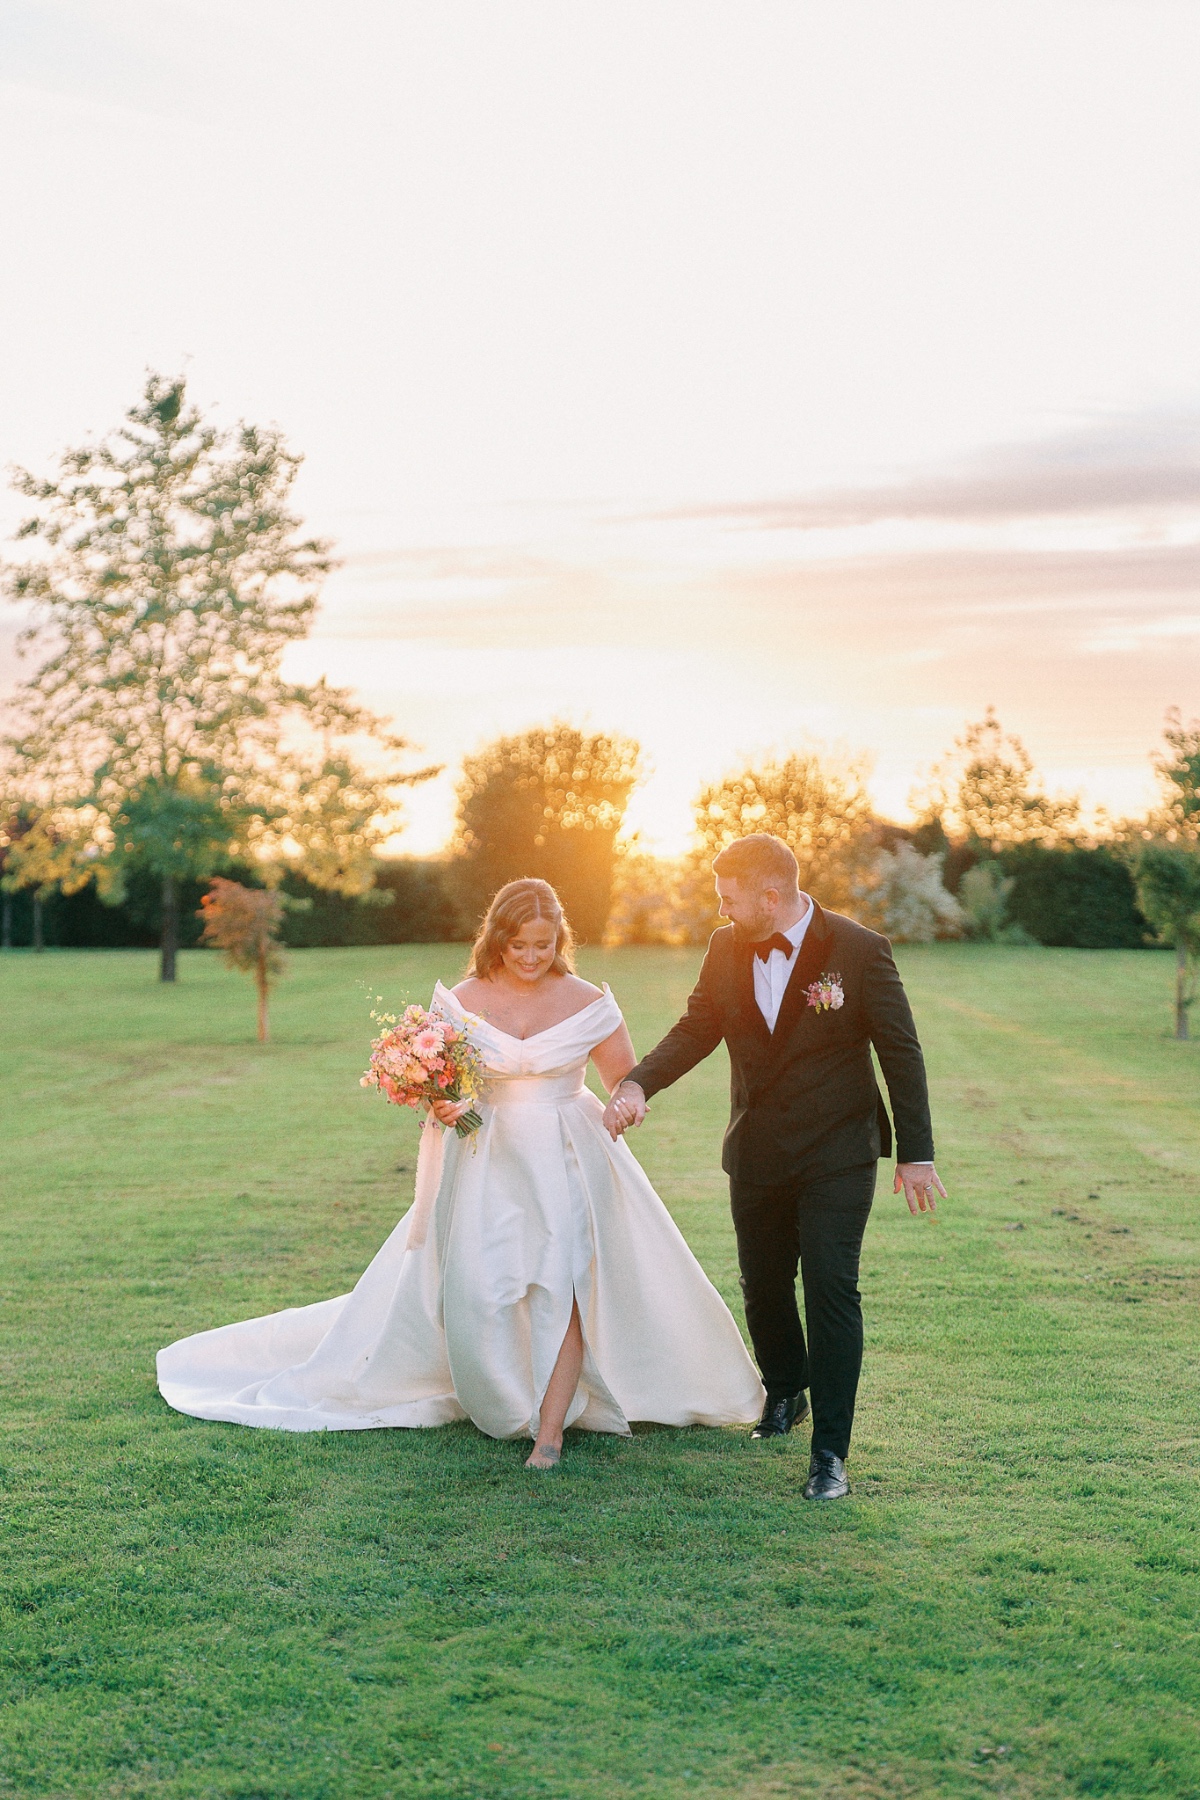 Golden sunset photos at timeless French wedding 